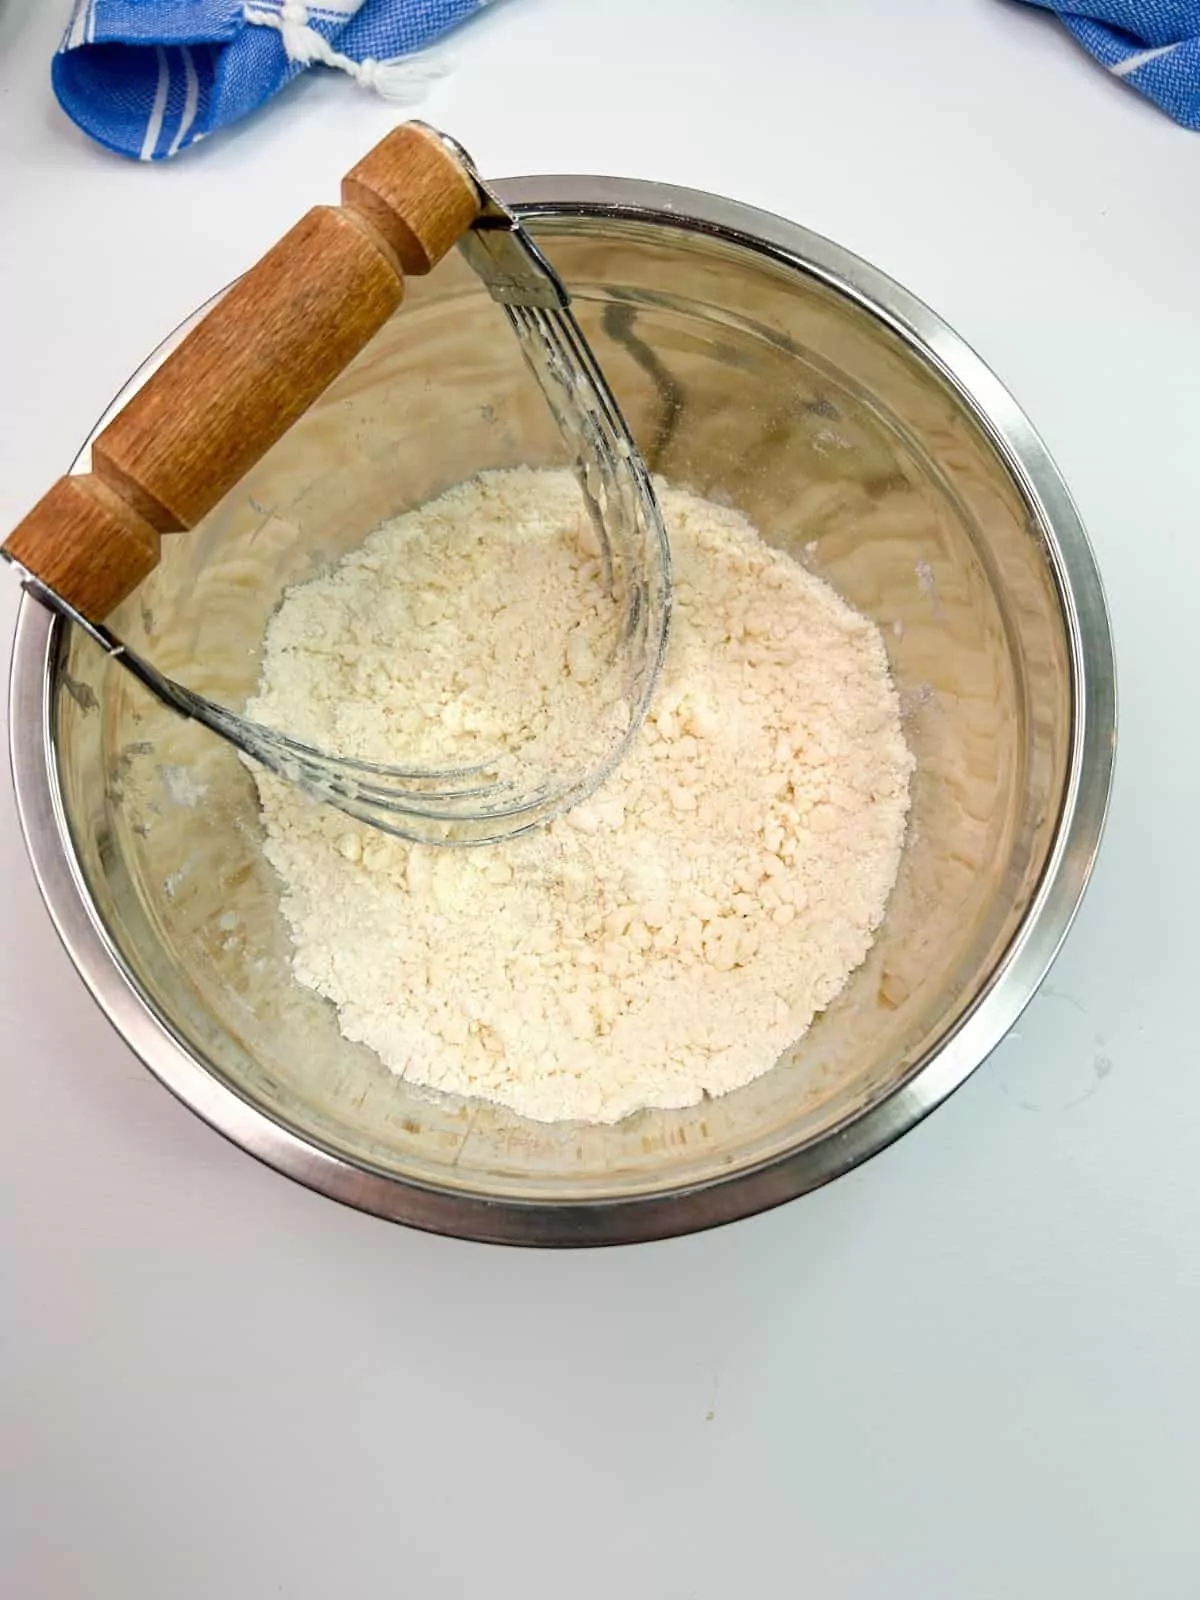 Use a pastry blender for pie crust dough.